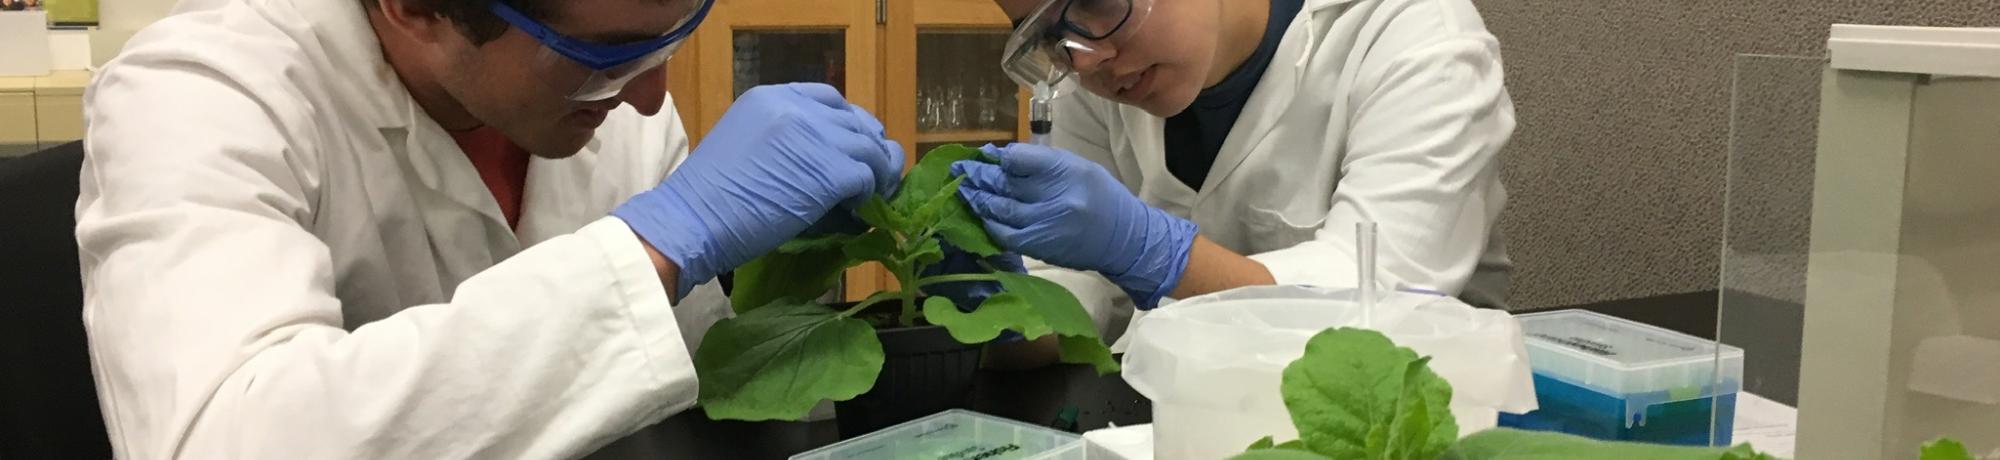 Students transfect tobacco plants in Prof. Zerbe's CURE course.